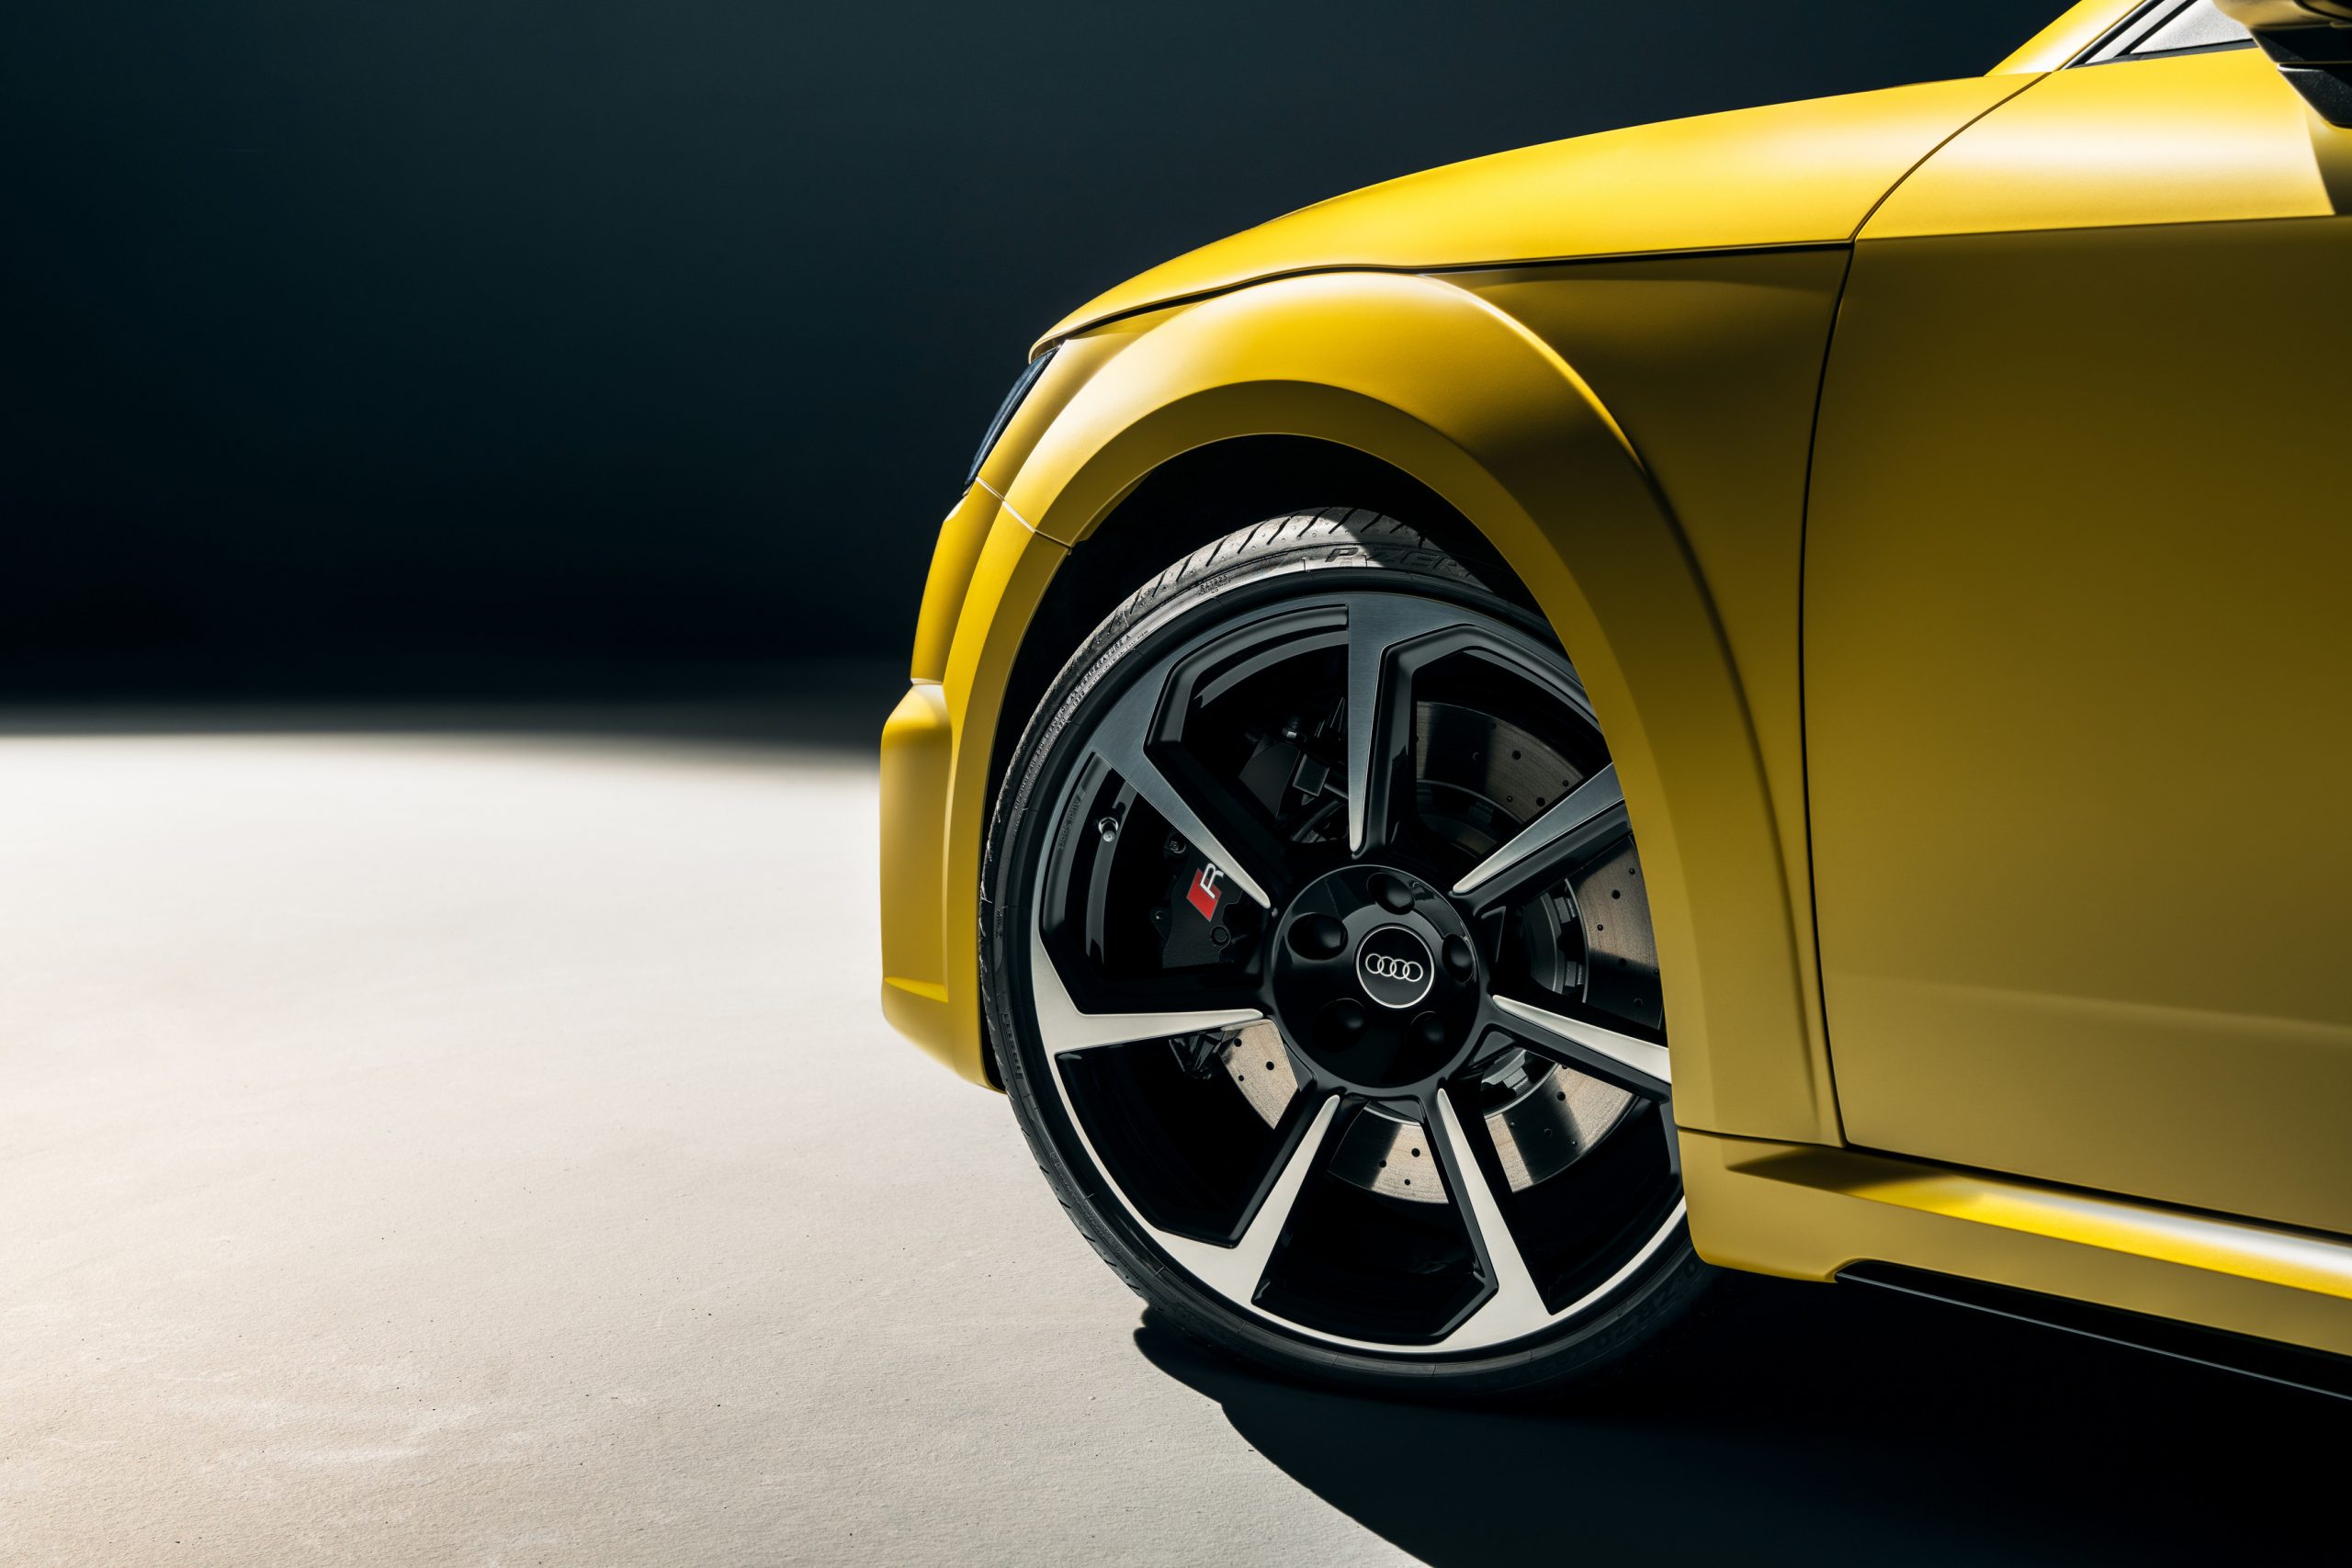 The matte Python Yellow paint finish emphasizes the sporty elegance of the TT RS.